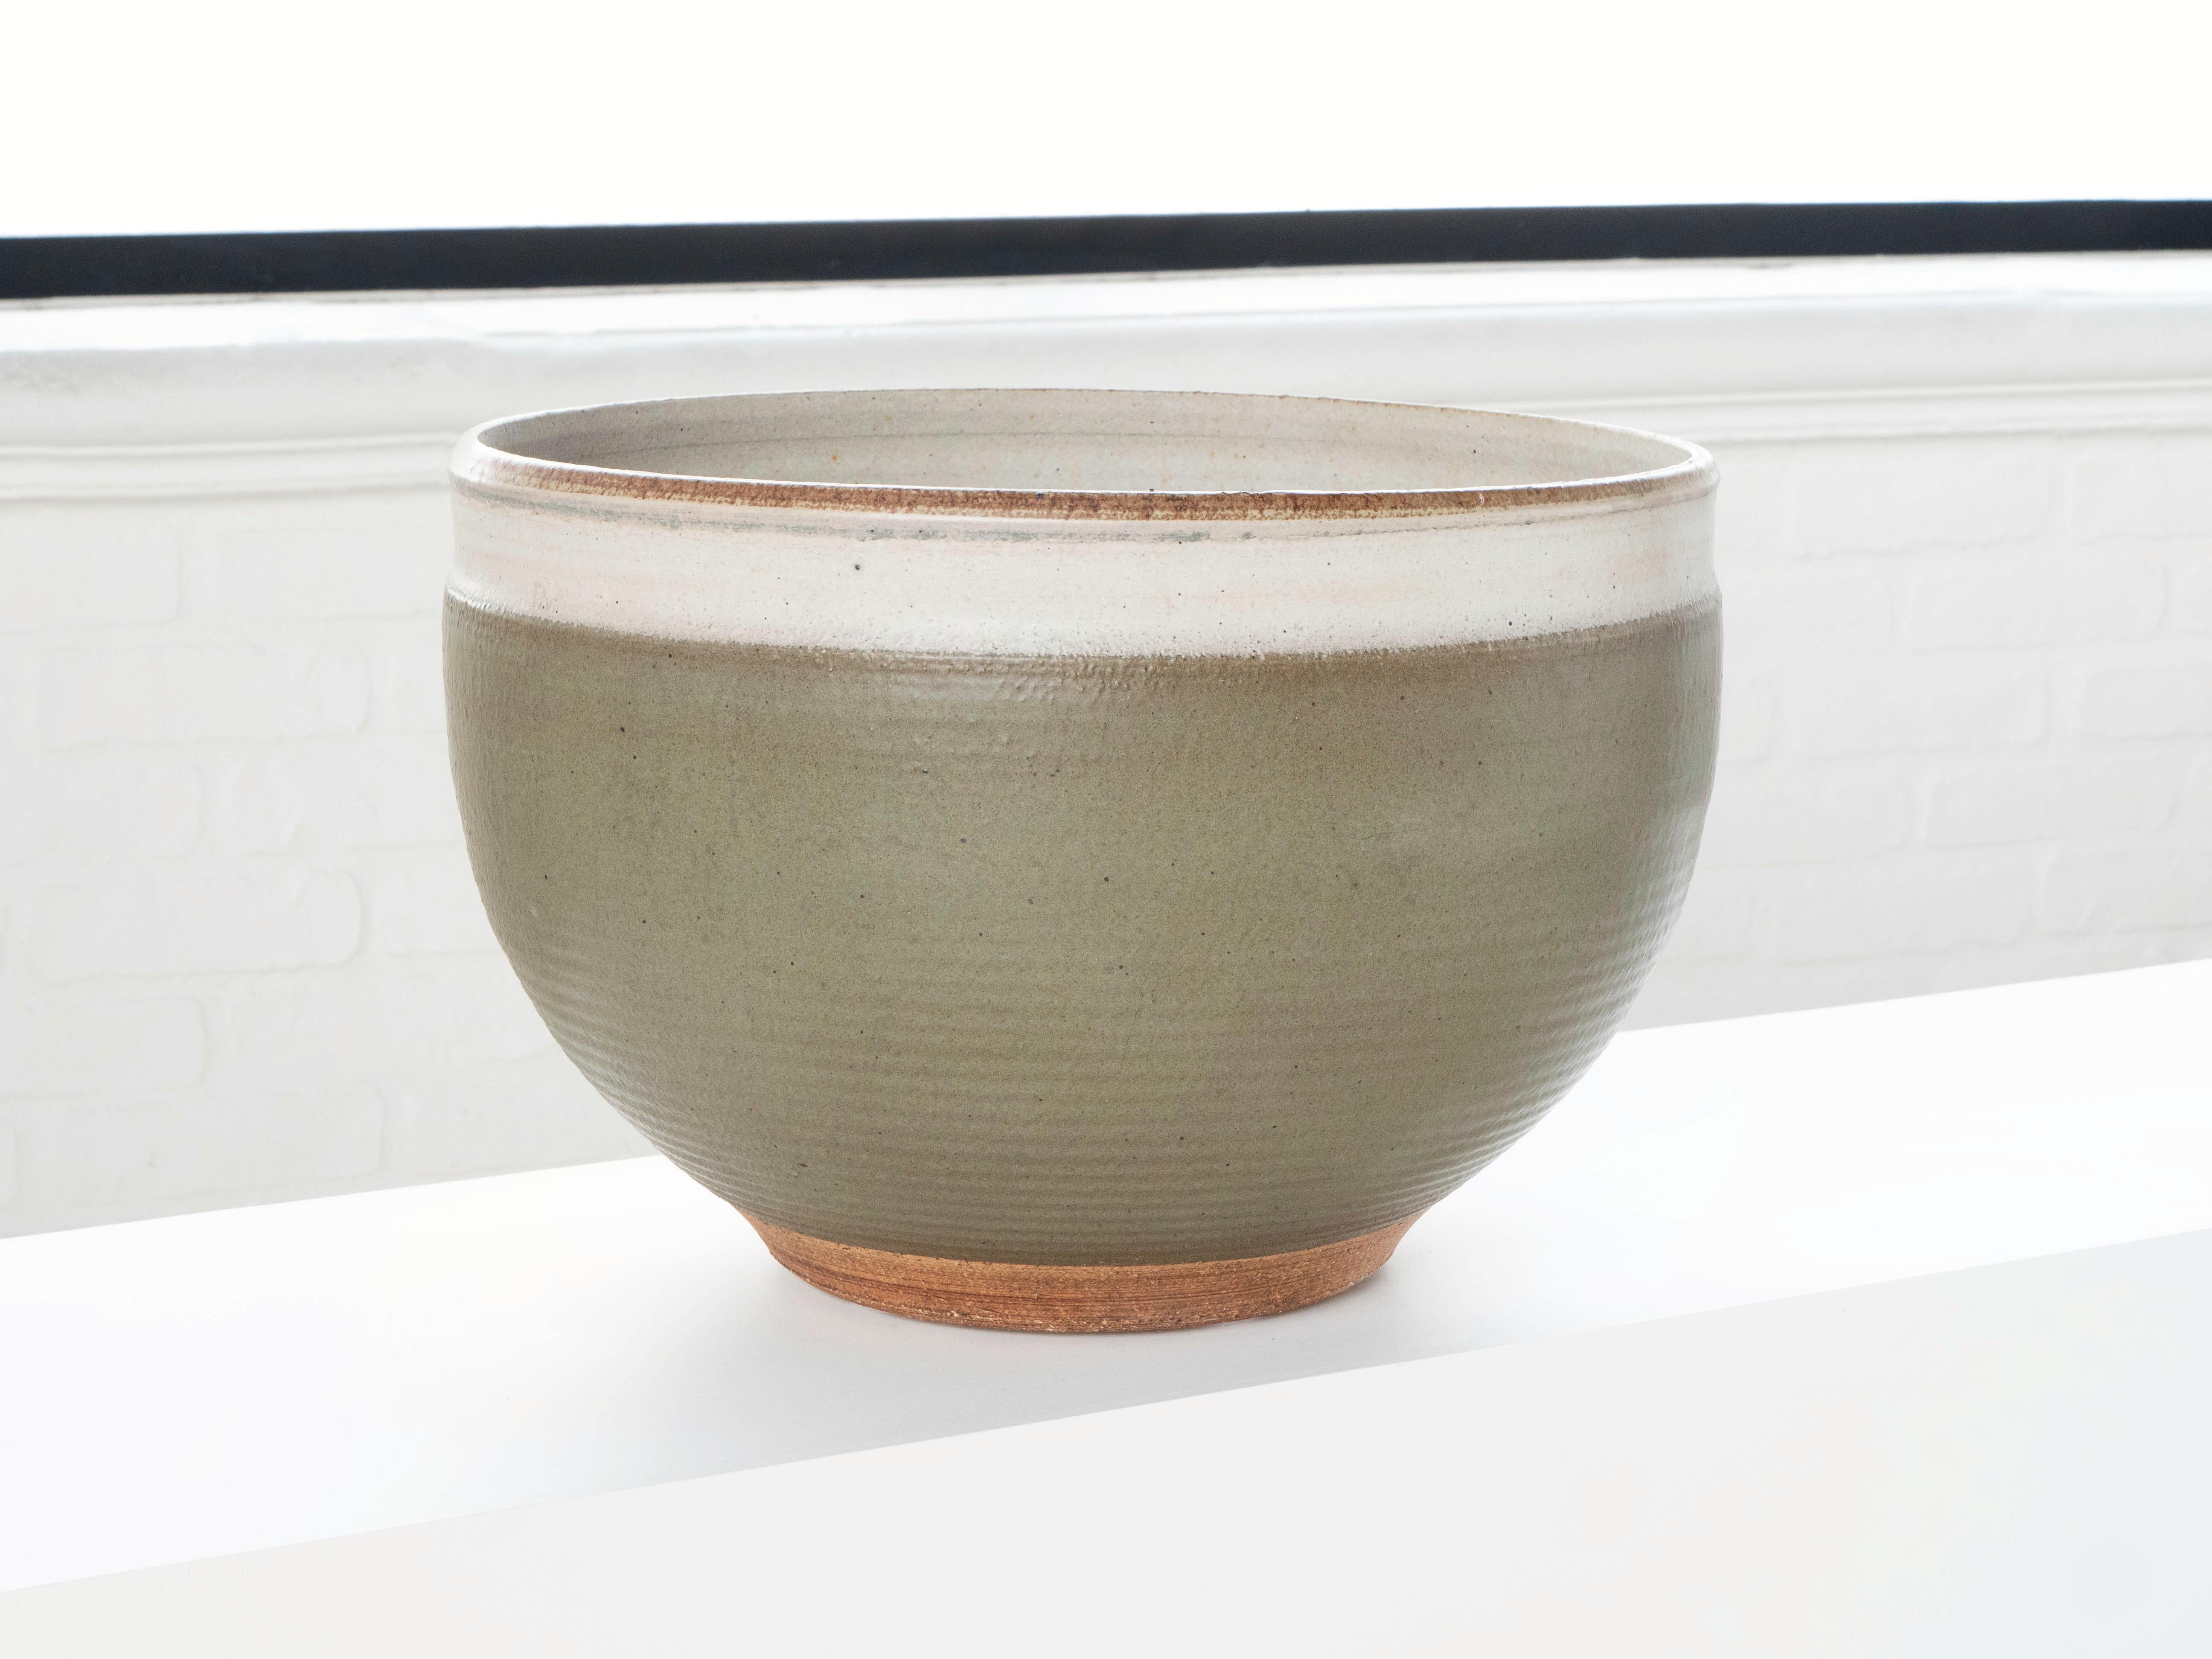 A large hand thrown bowl shaped planter by ceramist Bob Kinzie for his company Affiliated Craftsmen, California 1960's. The upper portion of the piece has a soft green glaze with espresso colored specks while the bottom portion shows exposed